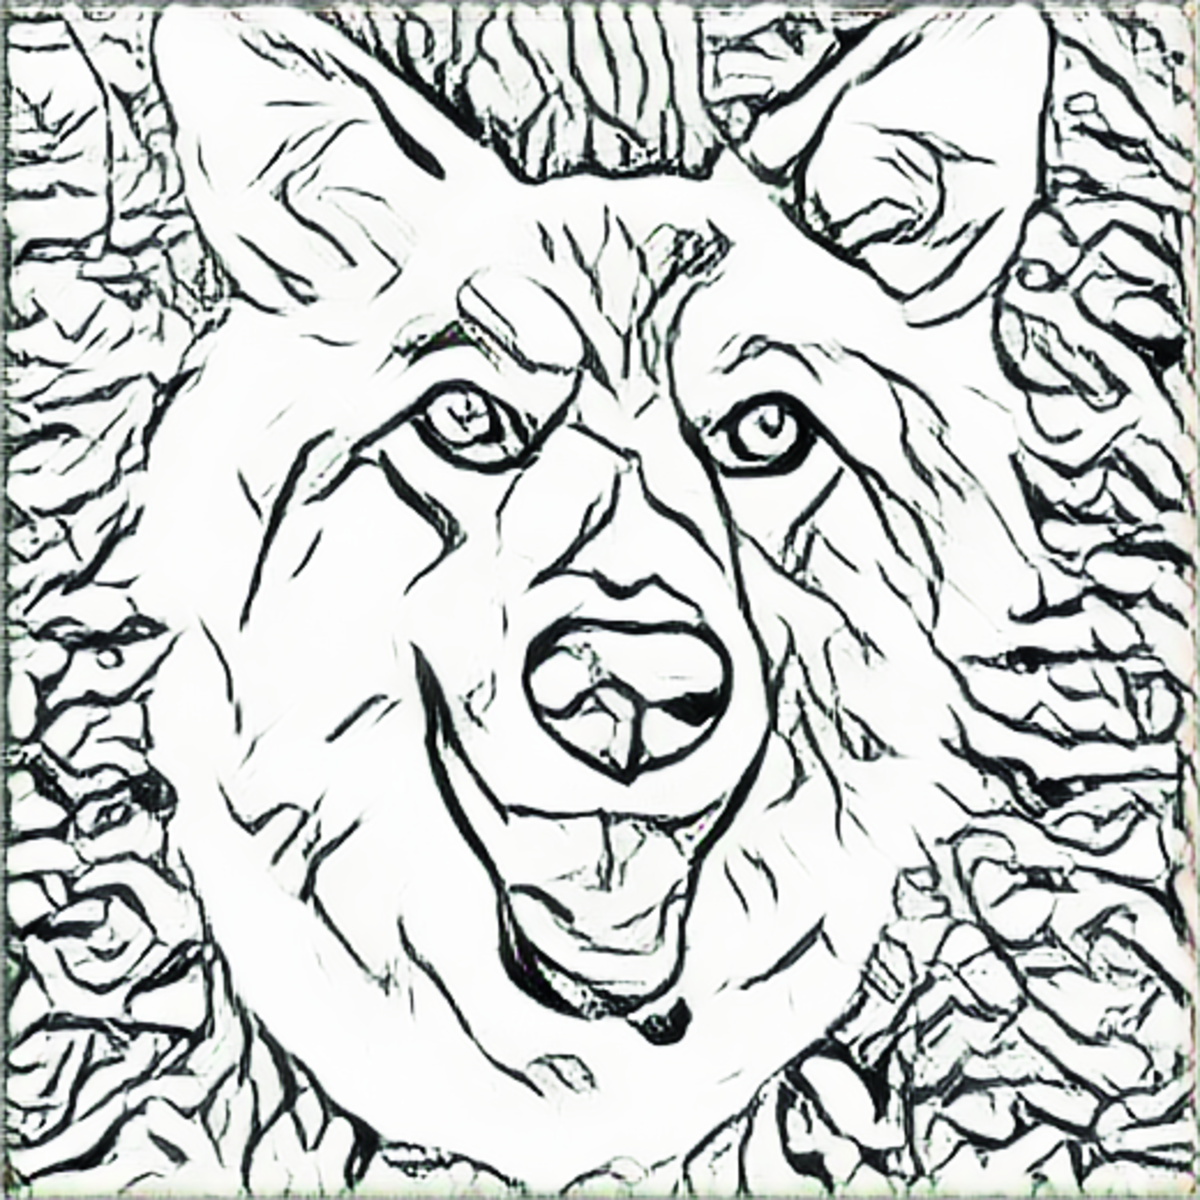 Photo to line drawing using AI style transfer